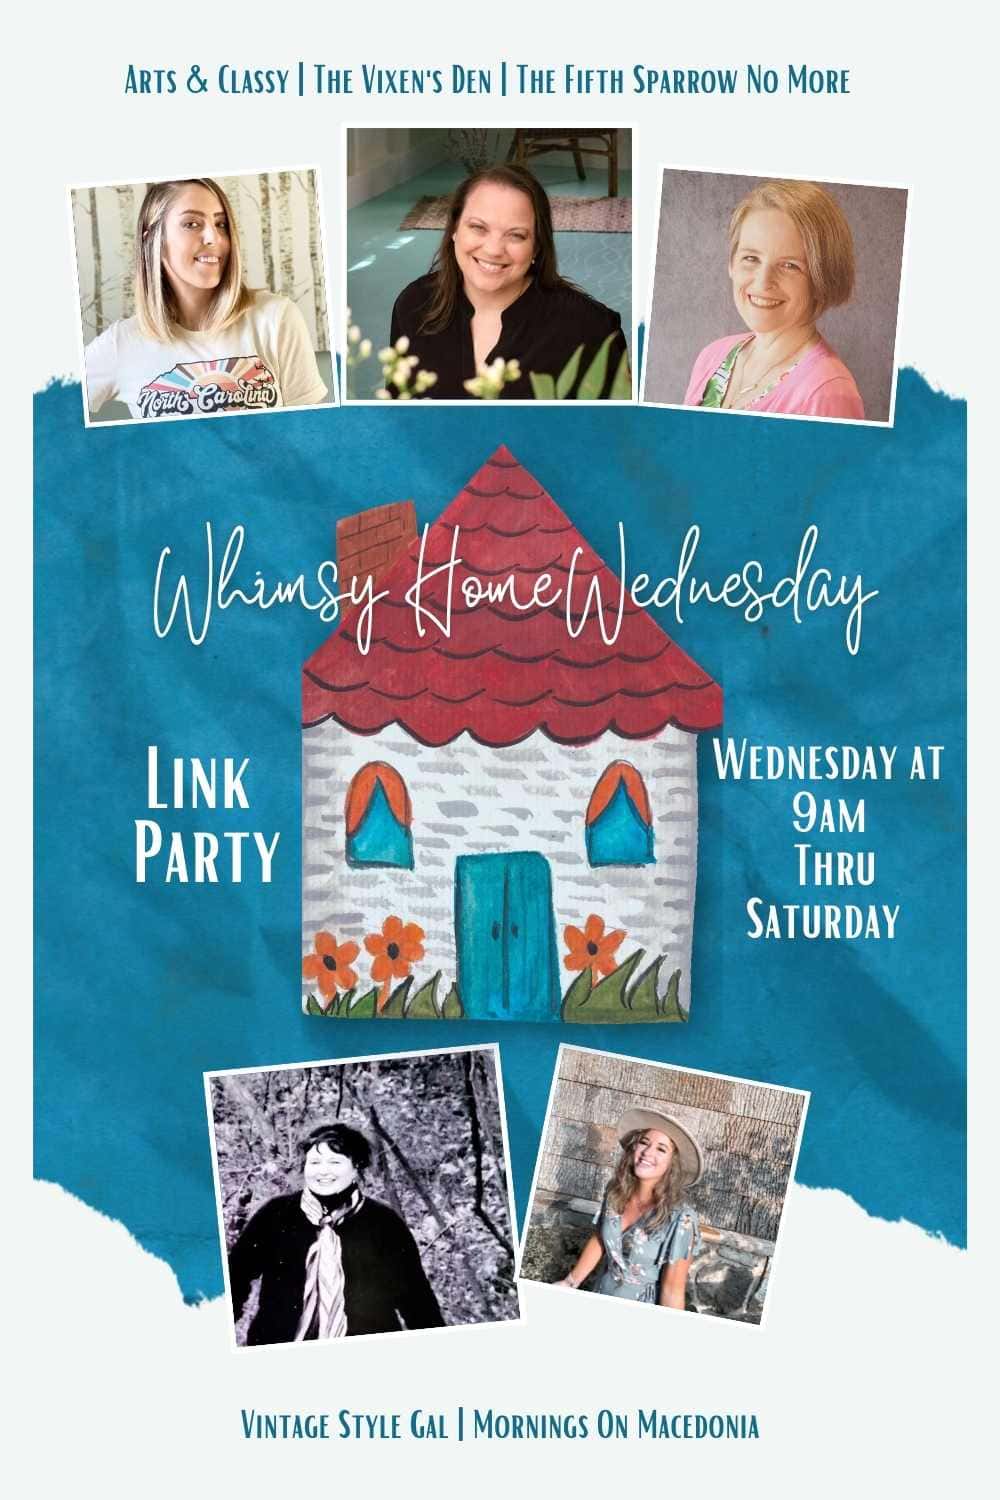 Whimsy Home Wednesday No. 4 - Whimsical Thanksgiving Home